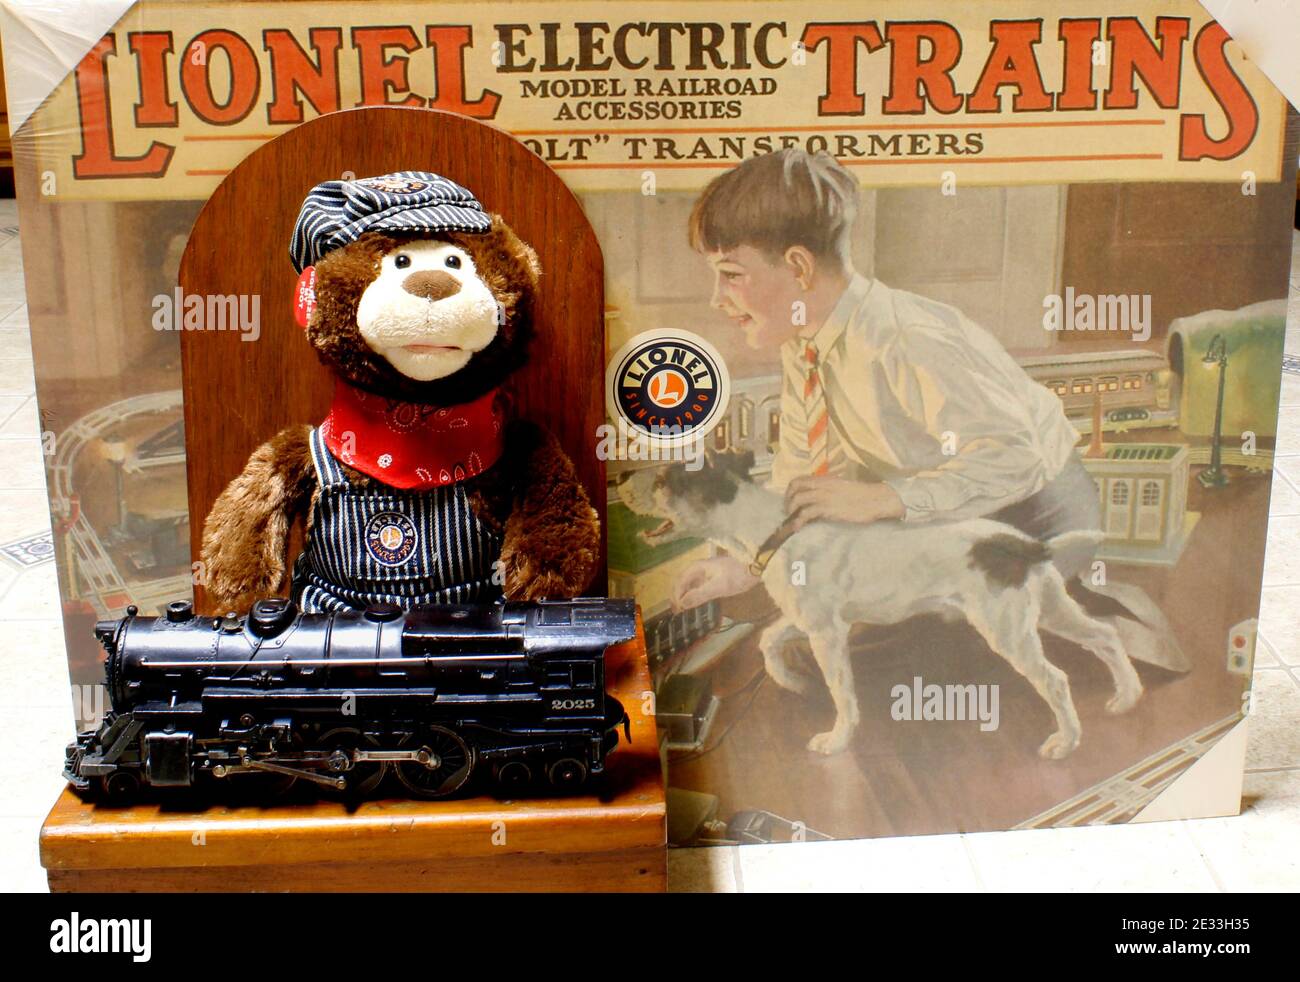 The photo depicts Lionel advertising, a teddy bear engineer, along with a 2025 Lionel steam engine. Stock Photo